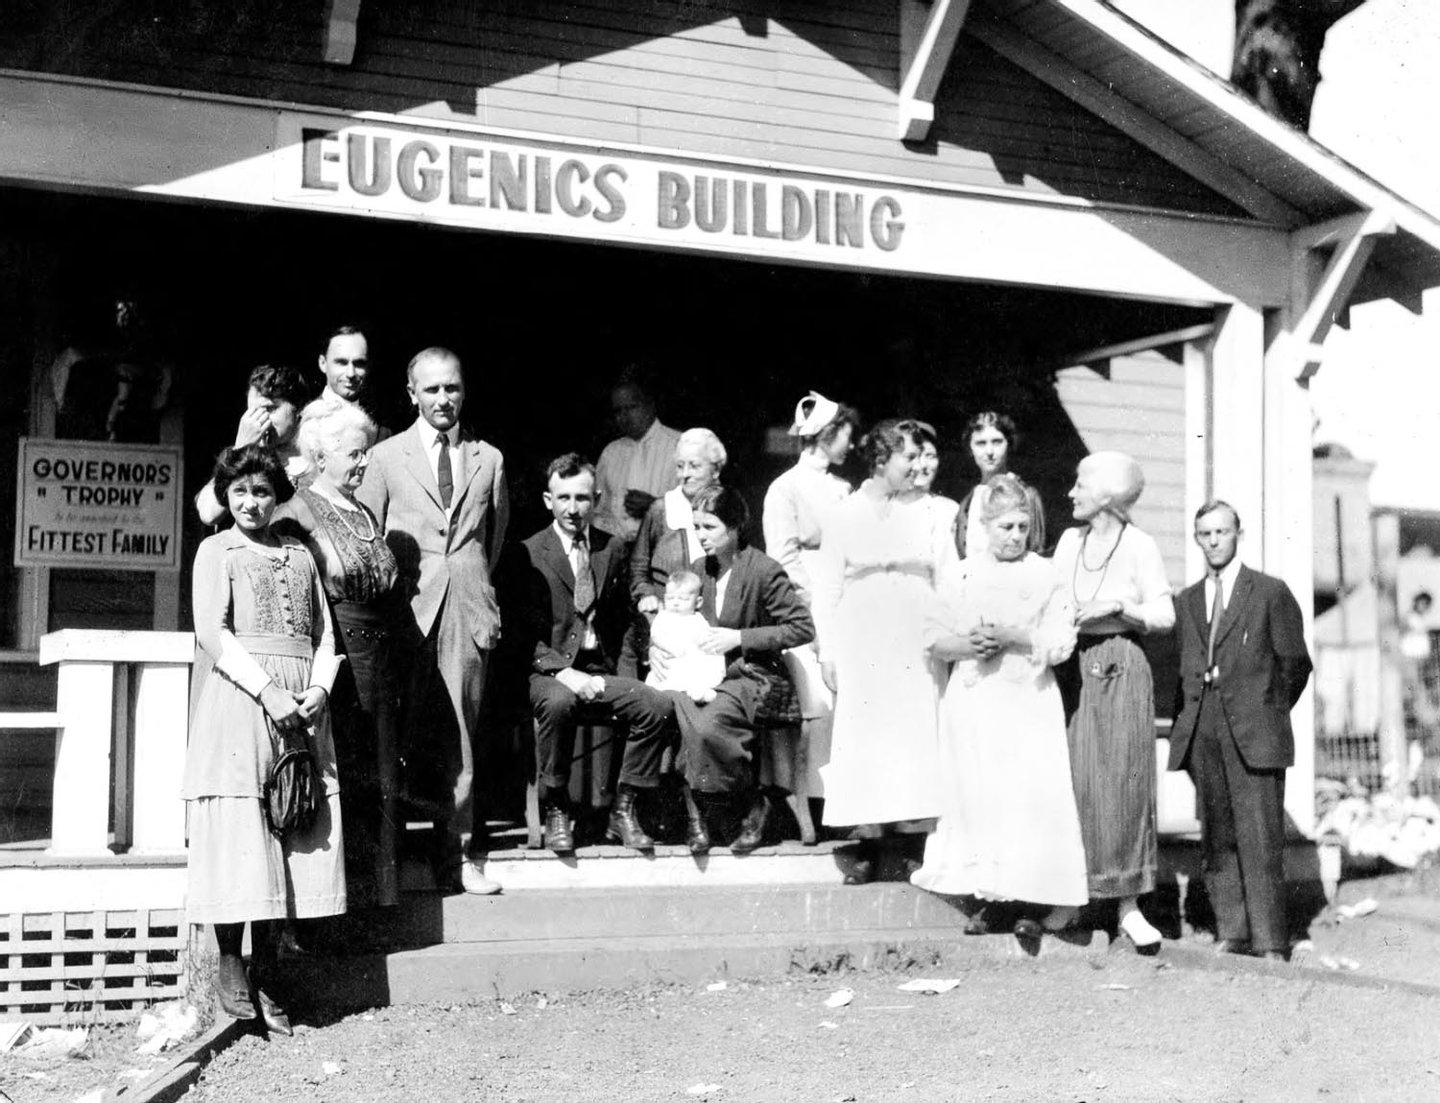 http://observador.pt/wp-content/uploads/2016/01/winning-family-of-the-fittest-family-award-stands-outside-of-the-eugenics-building-1925-rare-historical-photos.jpg